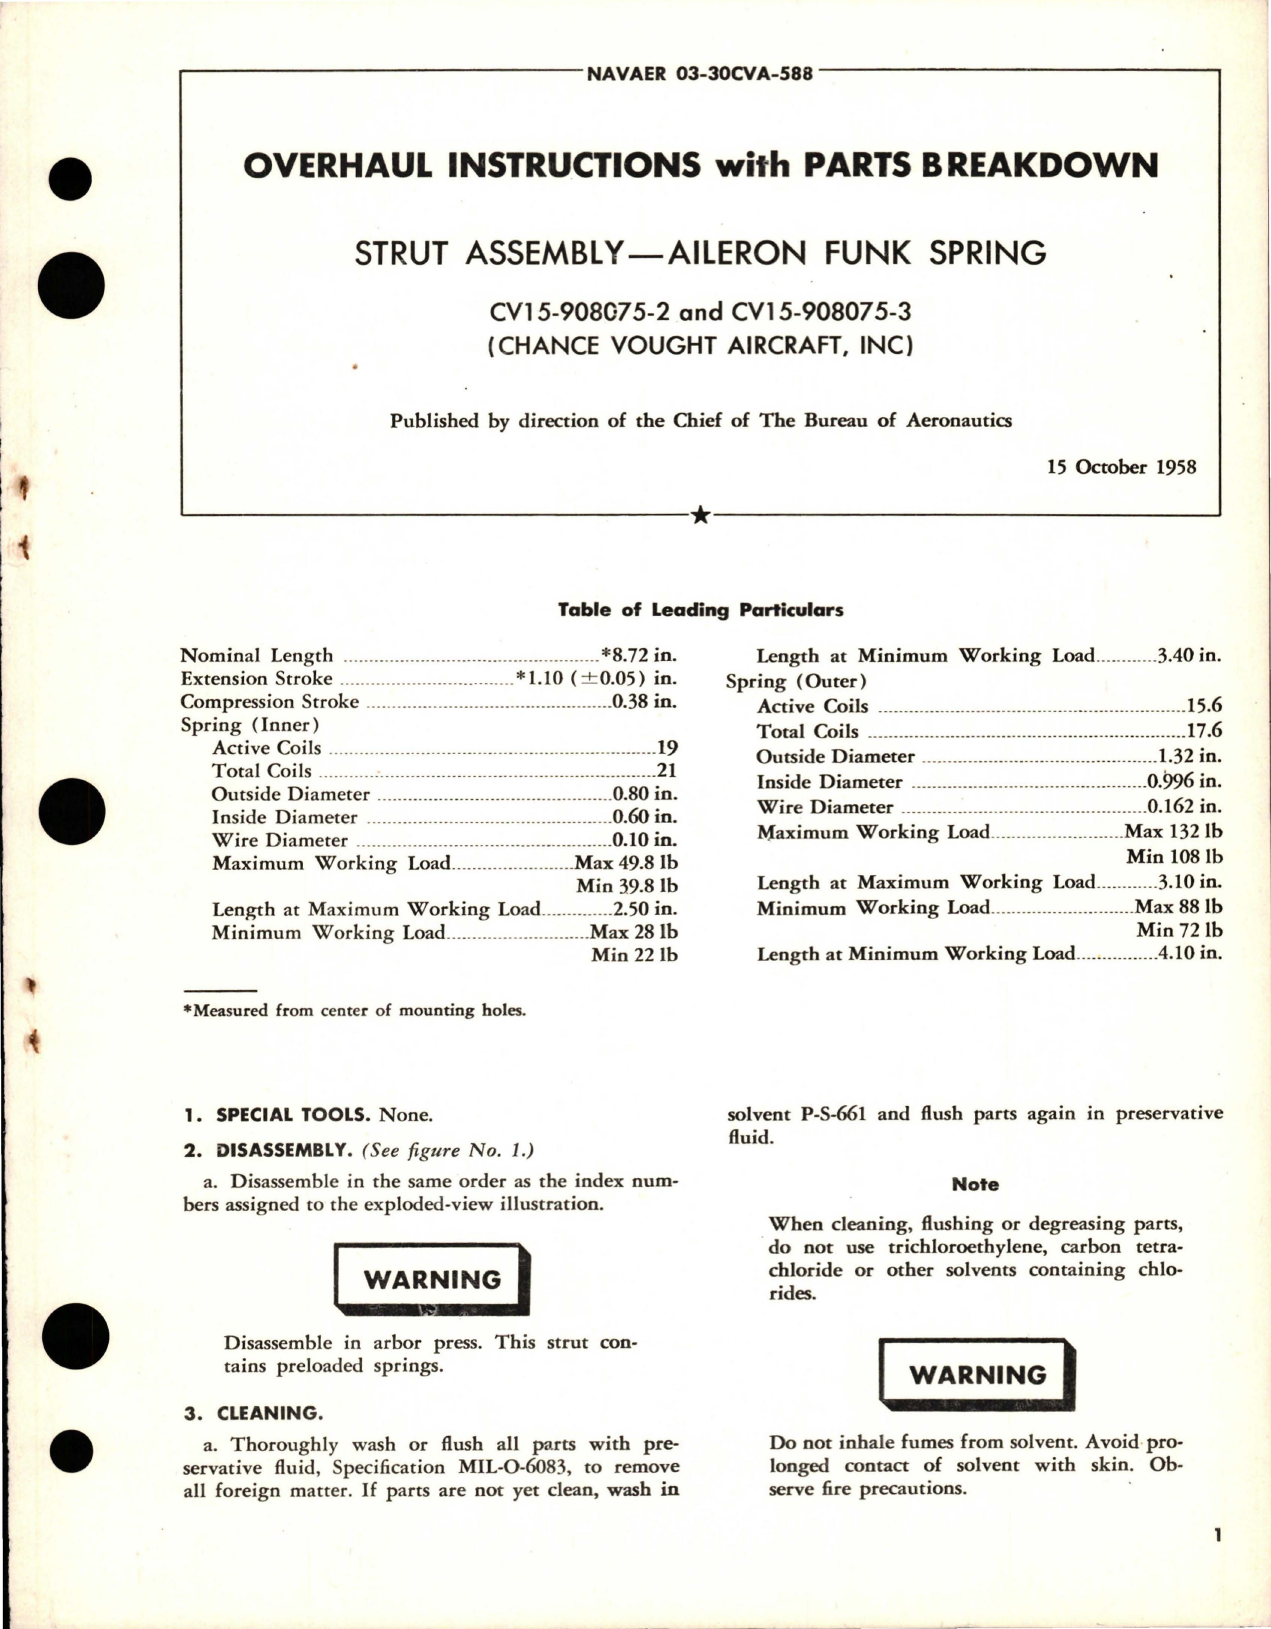 Sample page 1 from AirCorps Library document: Overhaul Instructions with Parts Breakdown for Aileron Funk Spring Strut Assembly - CV15-908075-2, CV15-908075-3